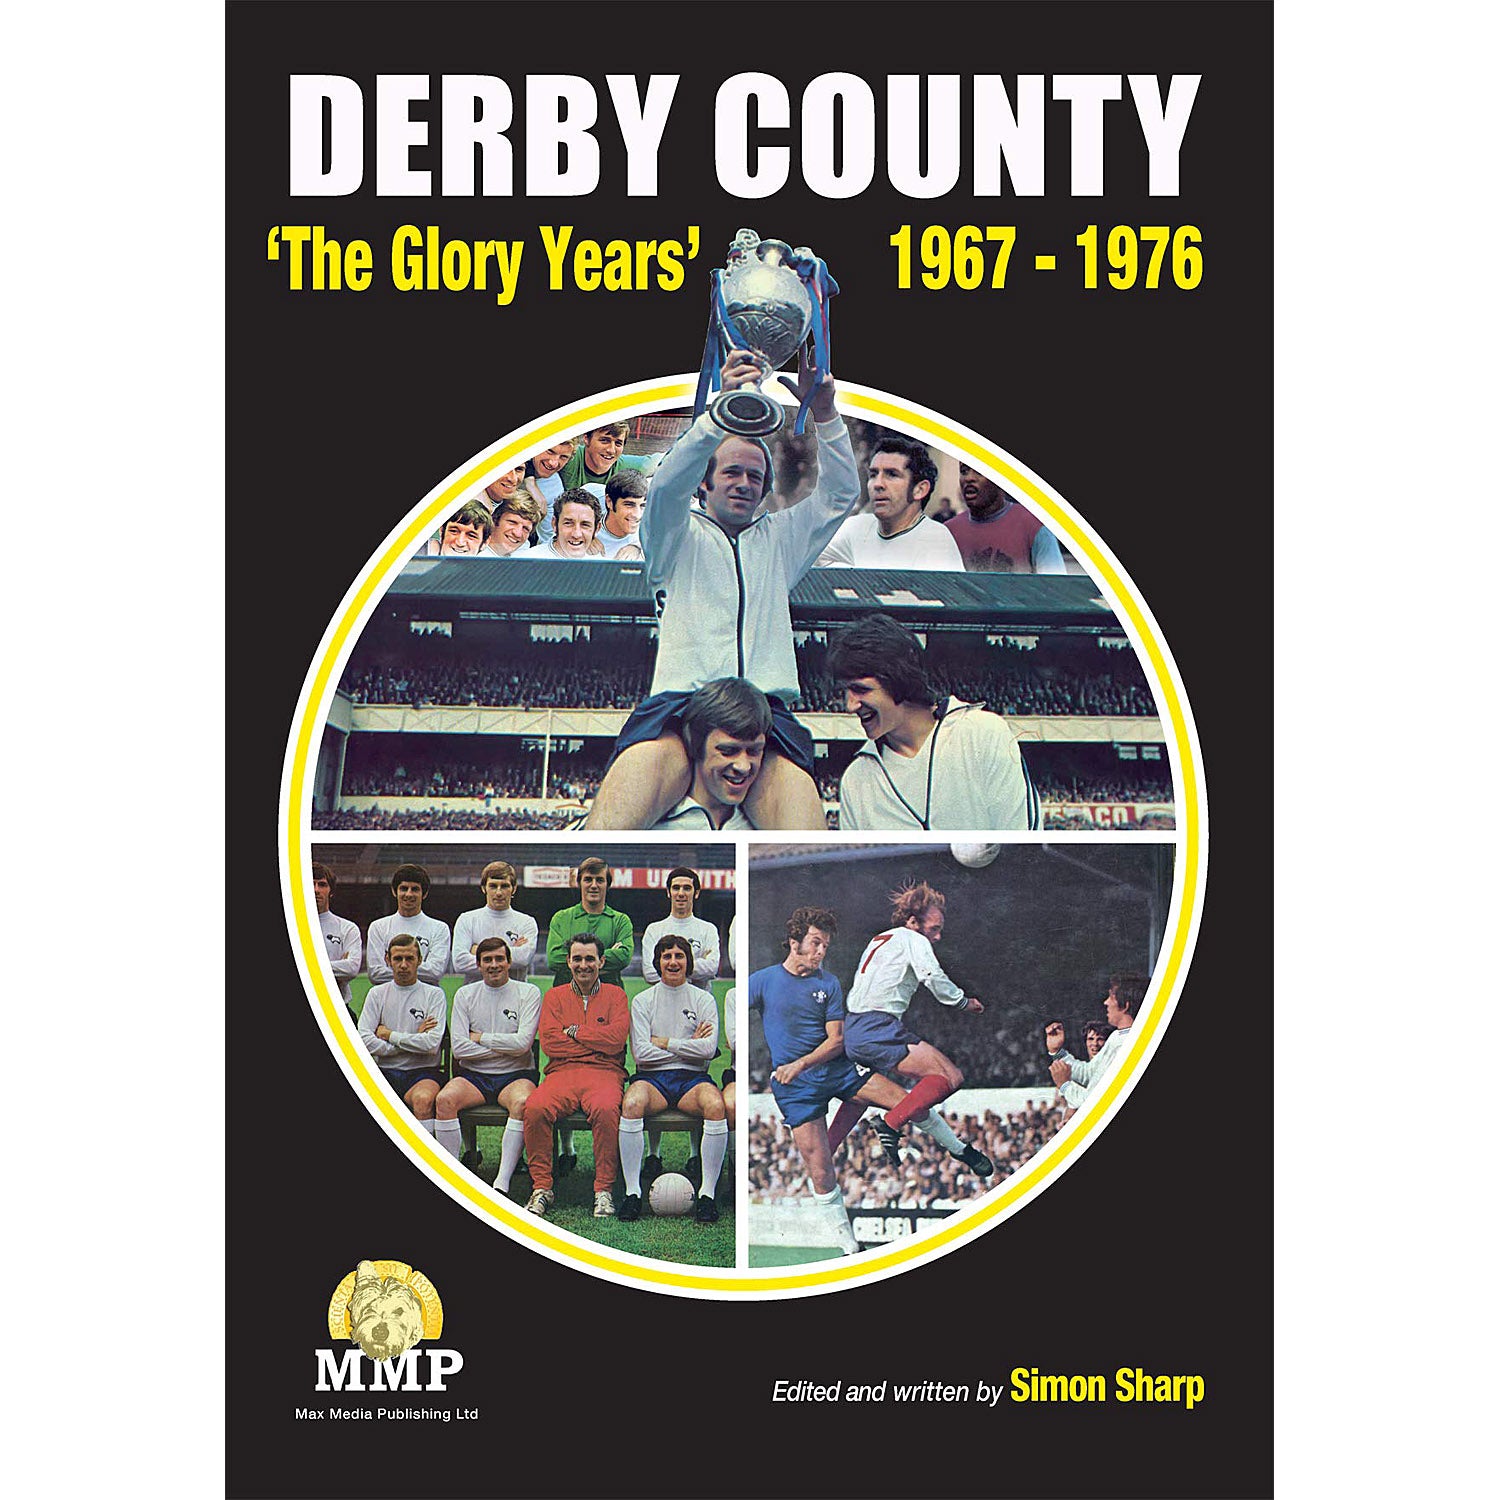 Derby County – The 'Glory Years' 1967-1976